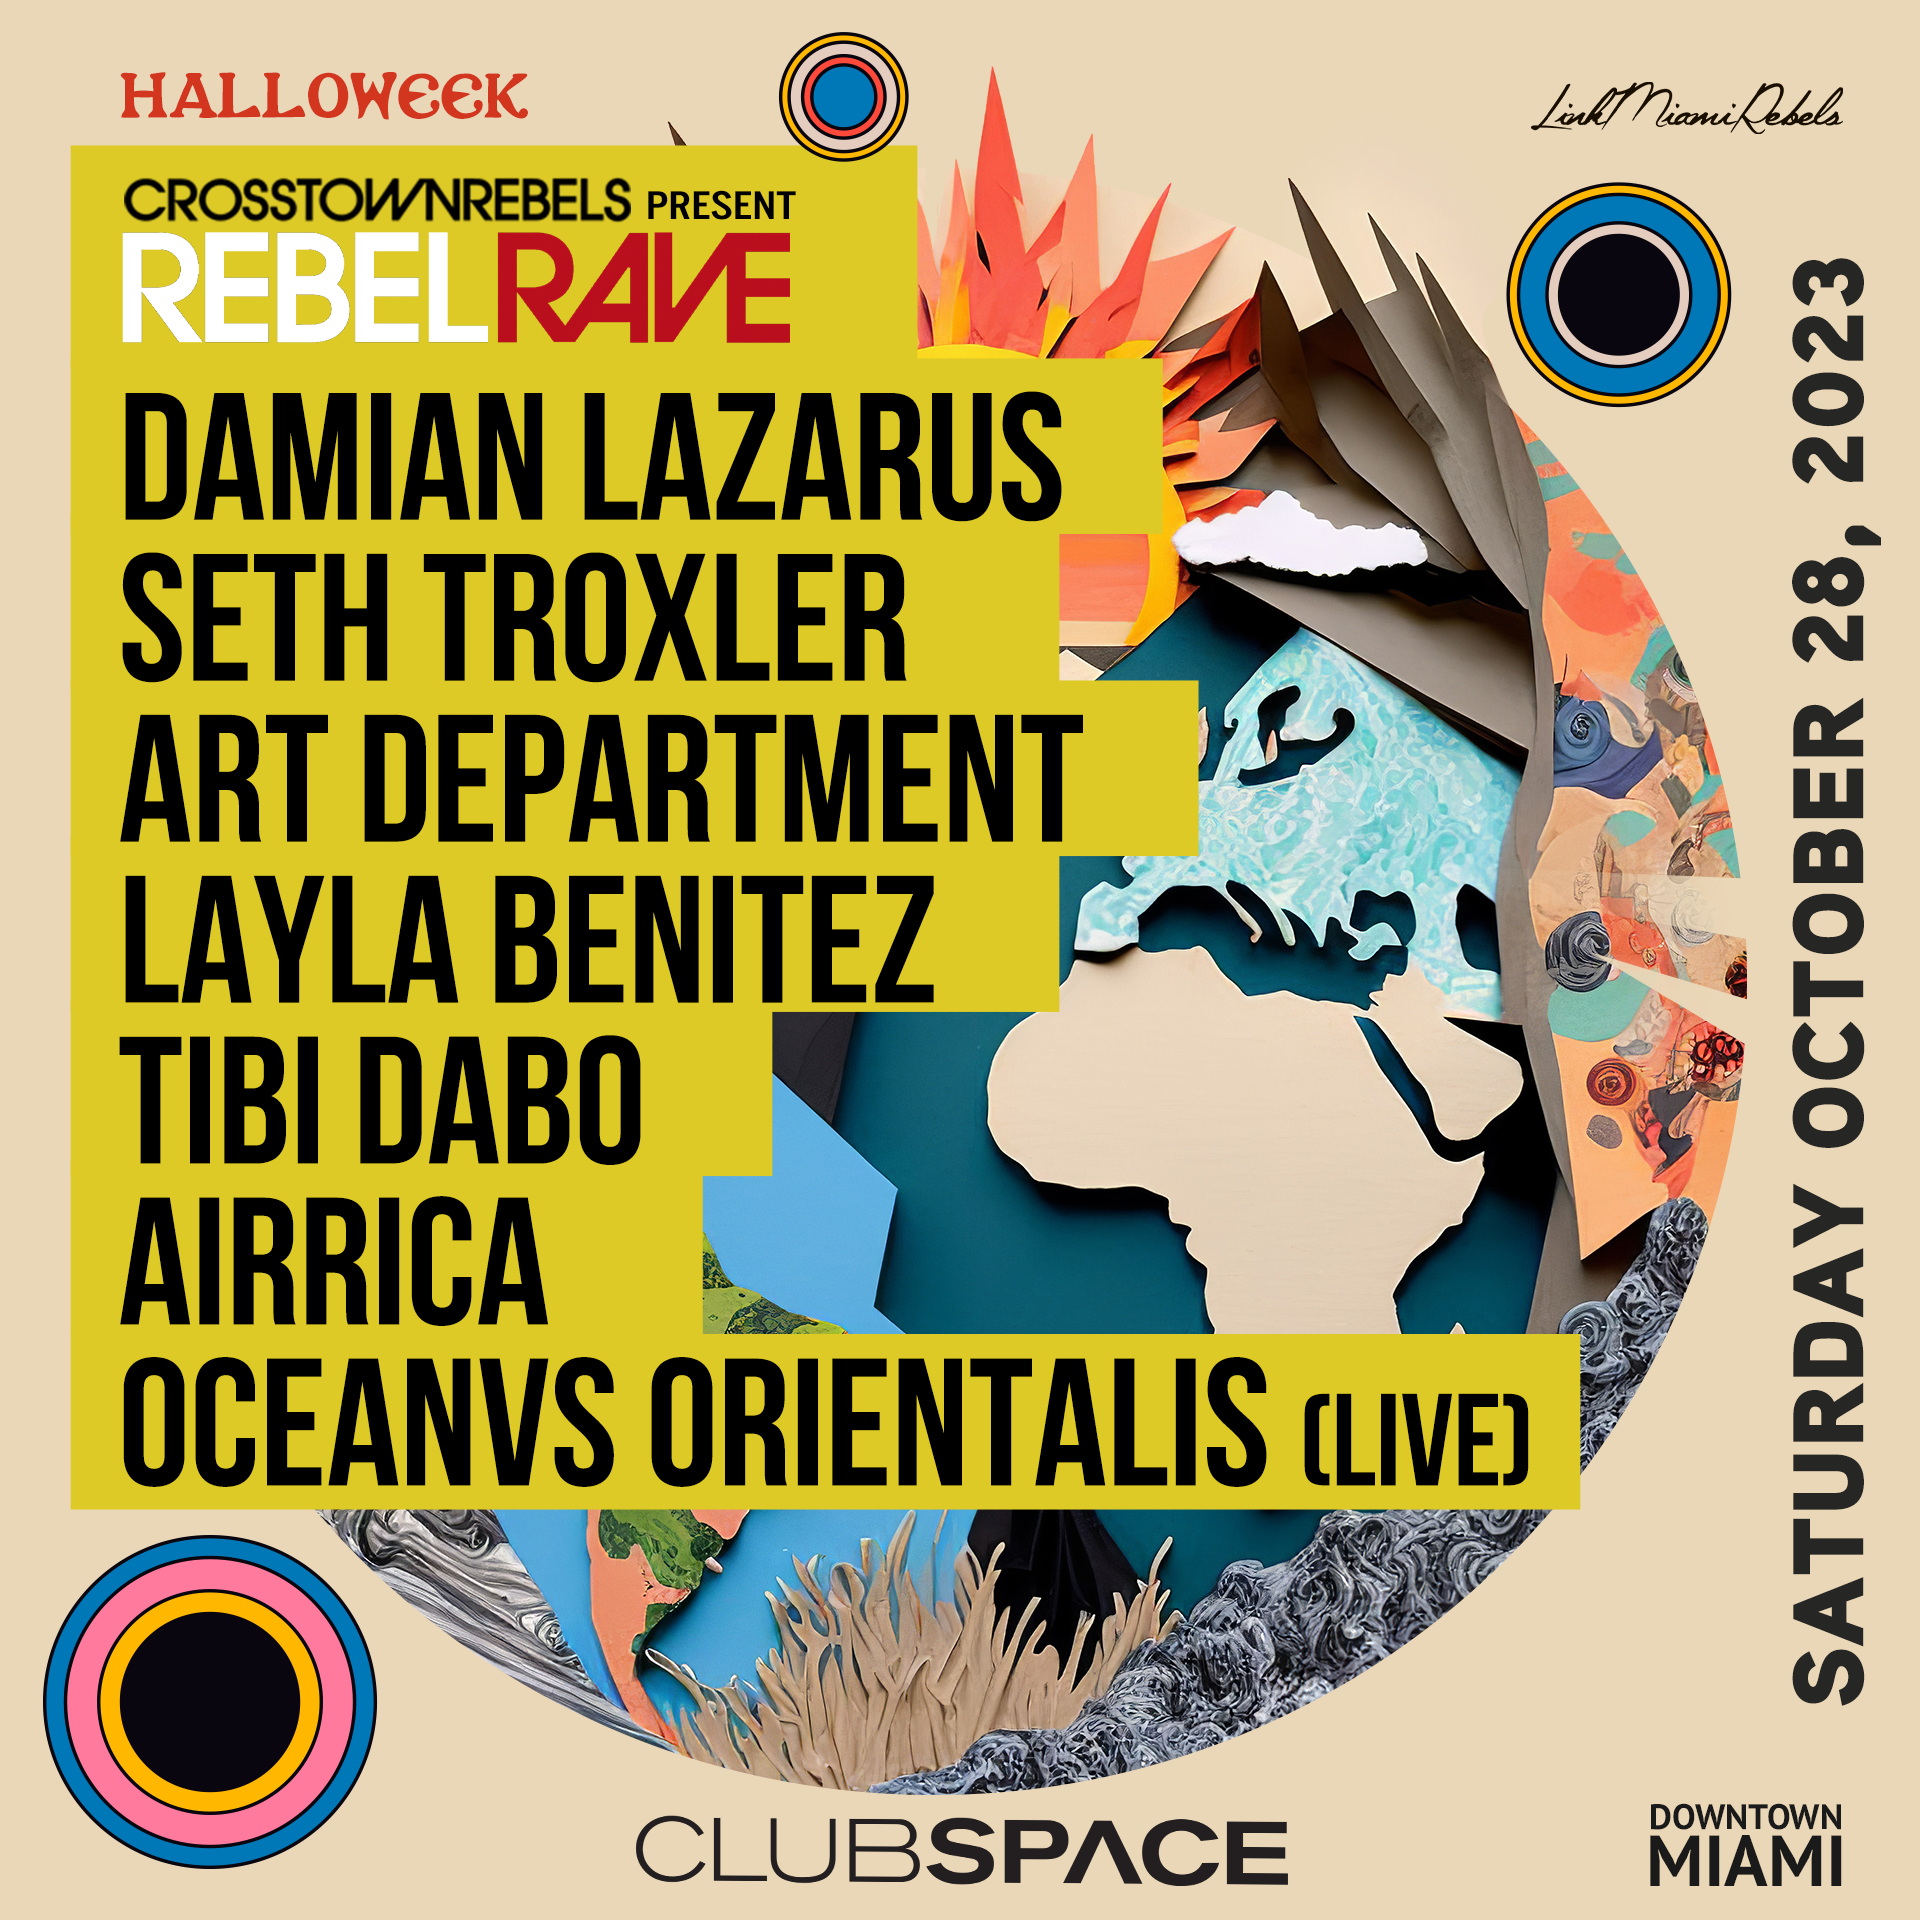 Things to Do in Miami: Peggy Gou and Sven Vath at Club Space November 22,  2019